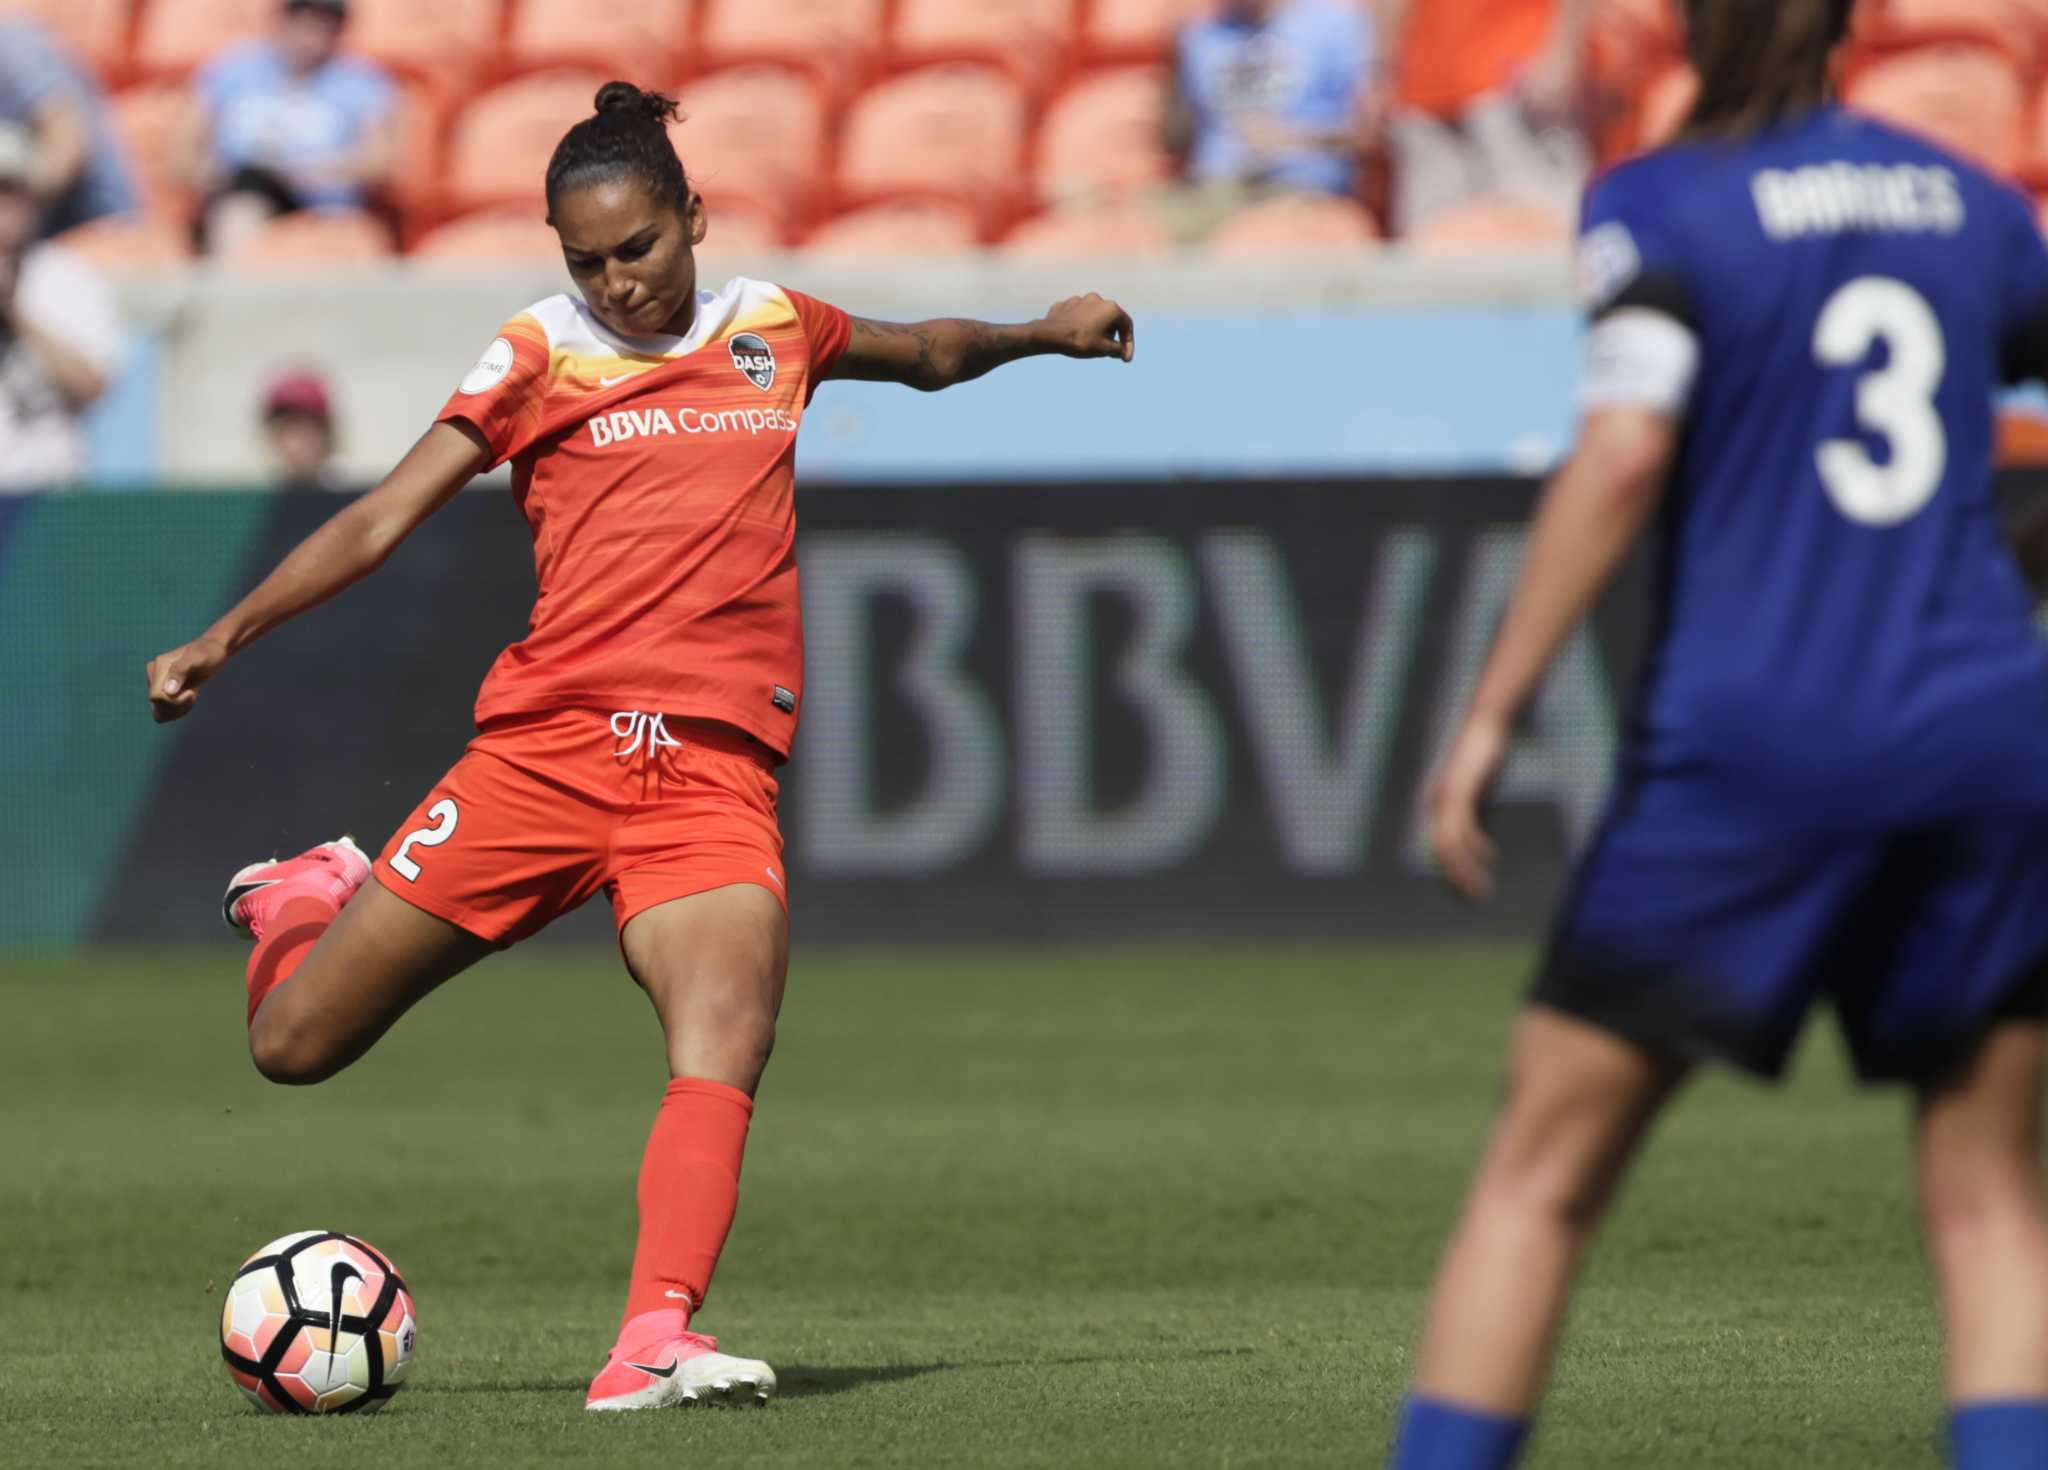 Dash defender Poliana named NWSL Player of the Week